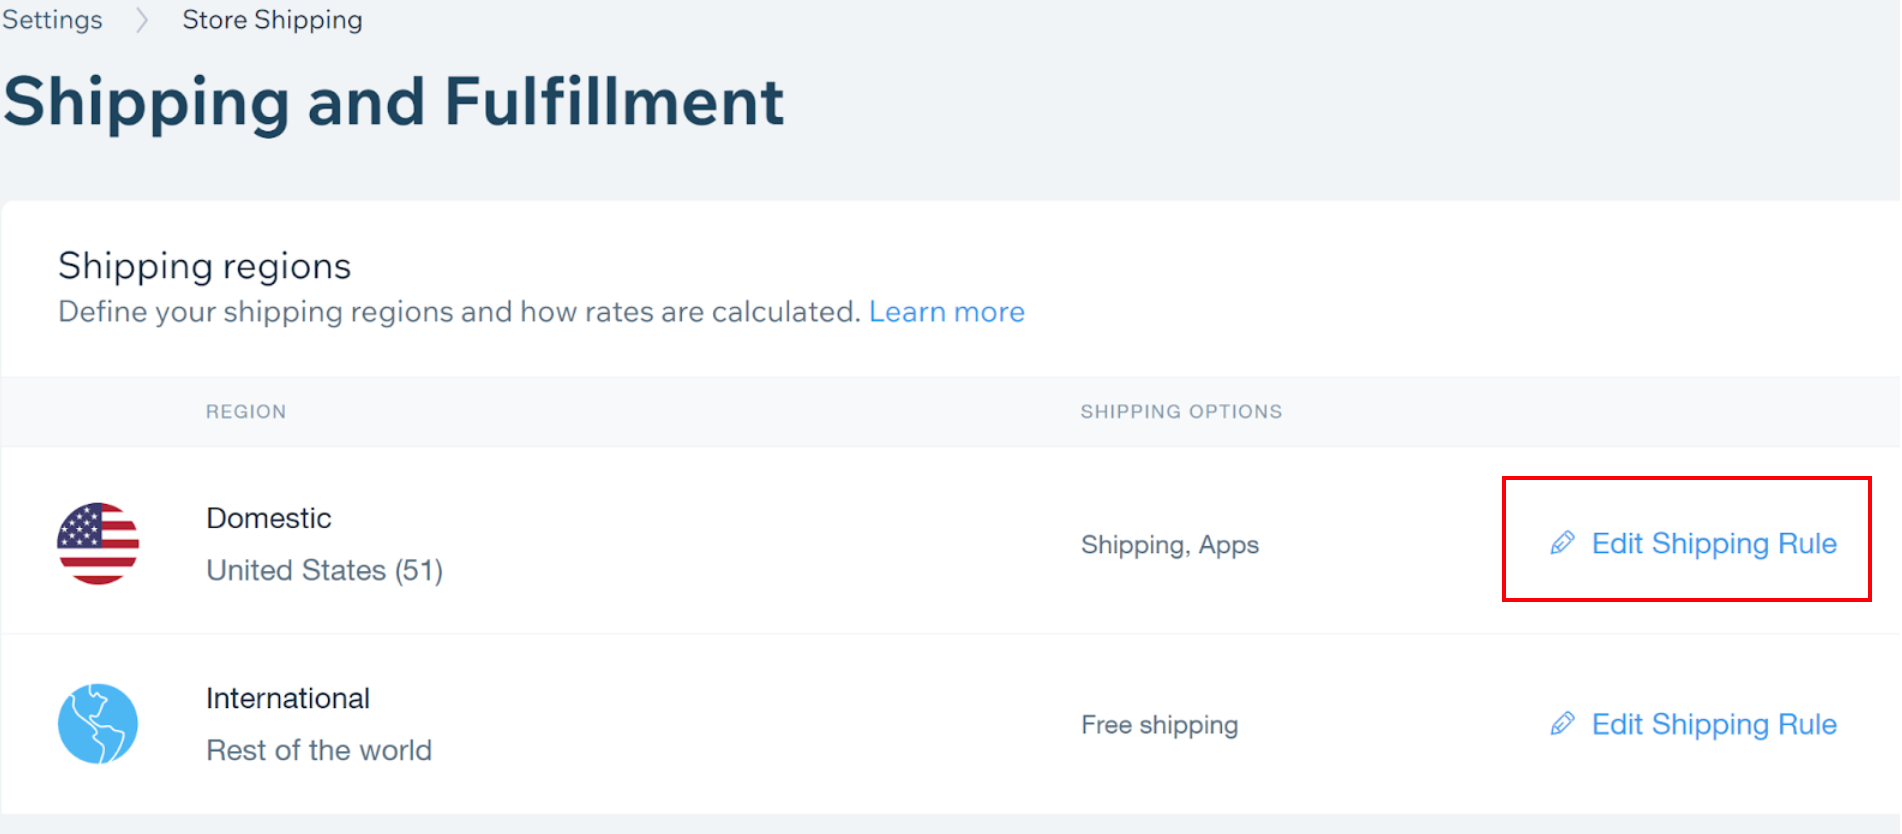 Wix Dashboard Store Shipping page. Edit Shipping Rule link highlighted.